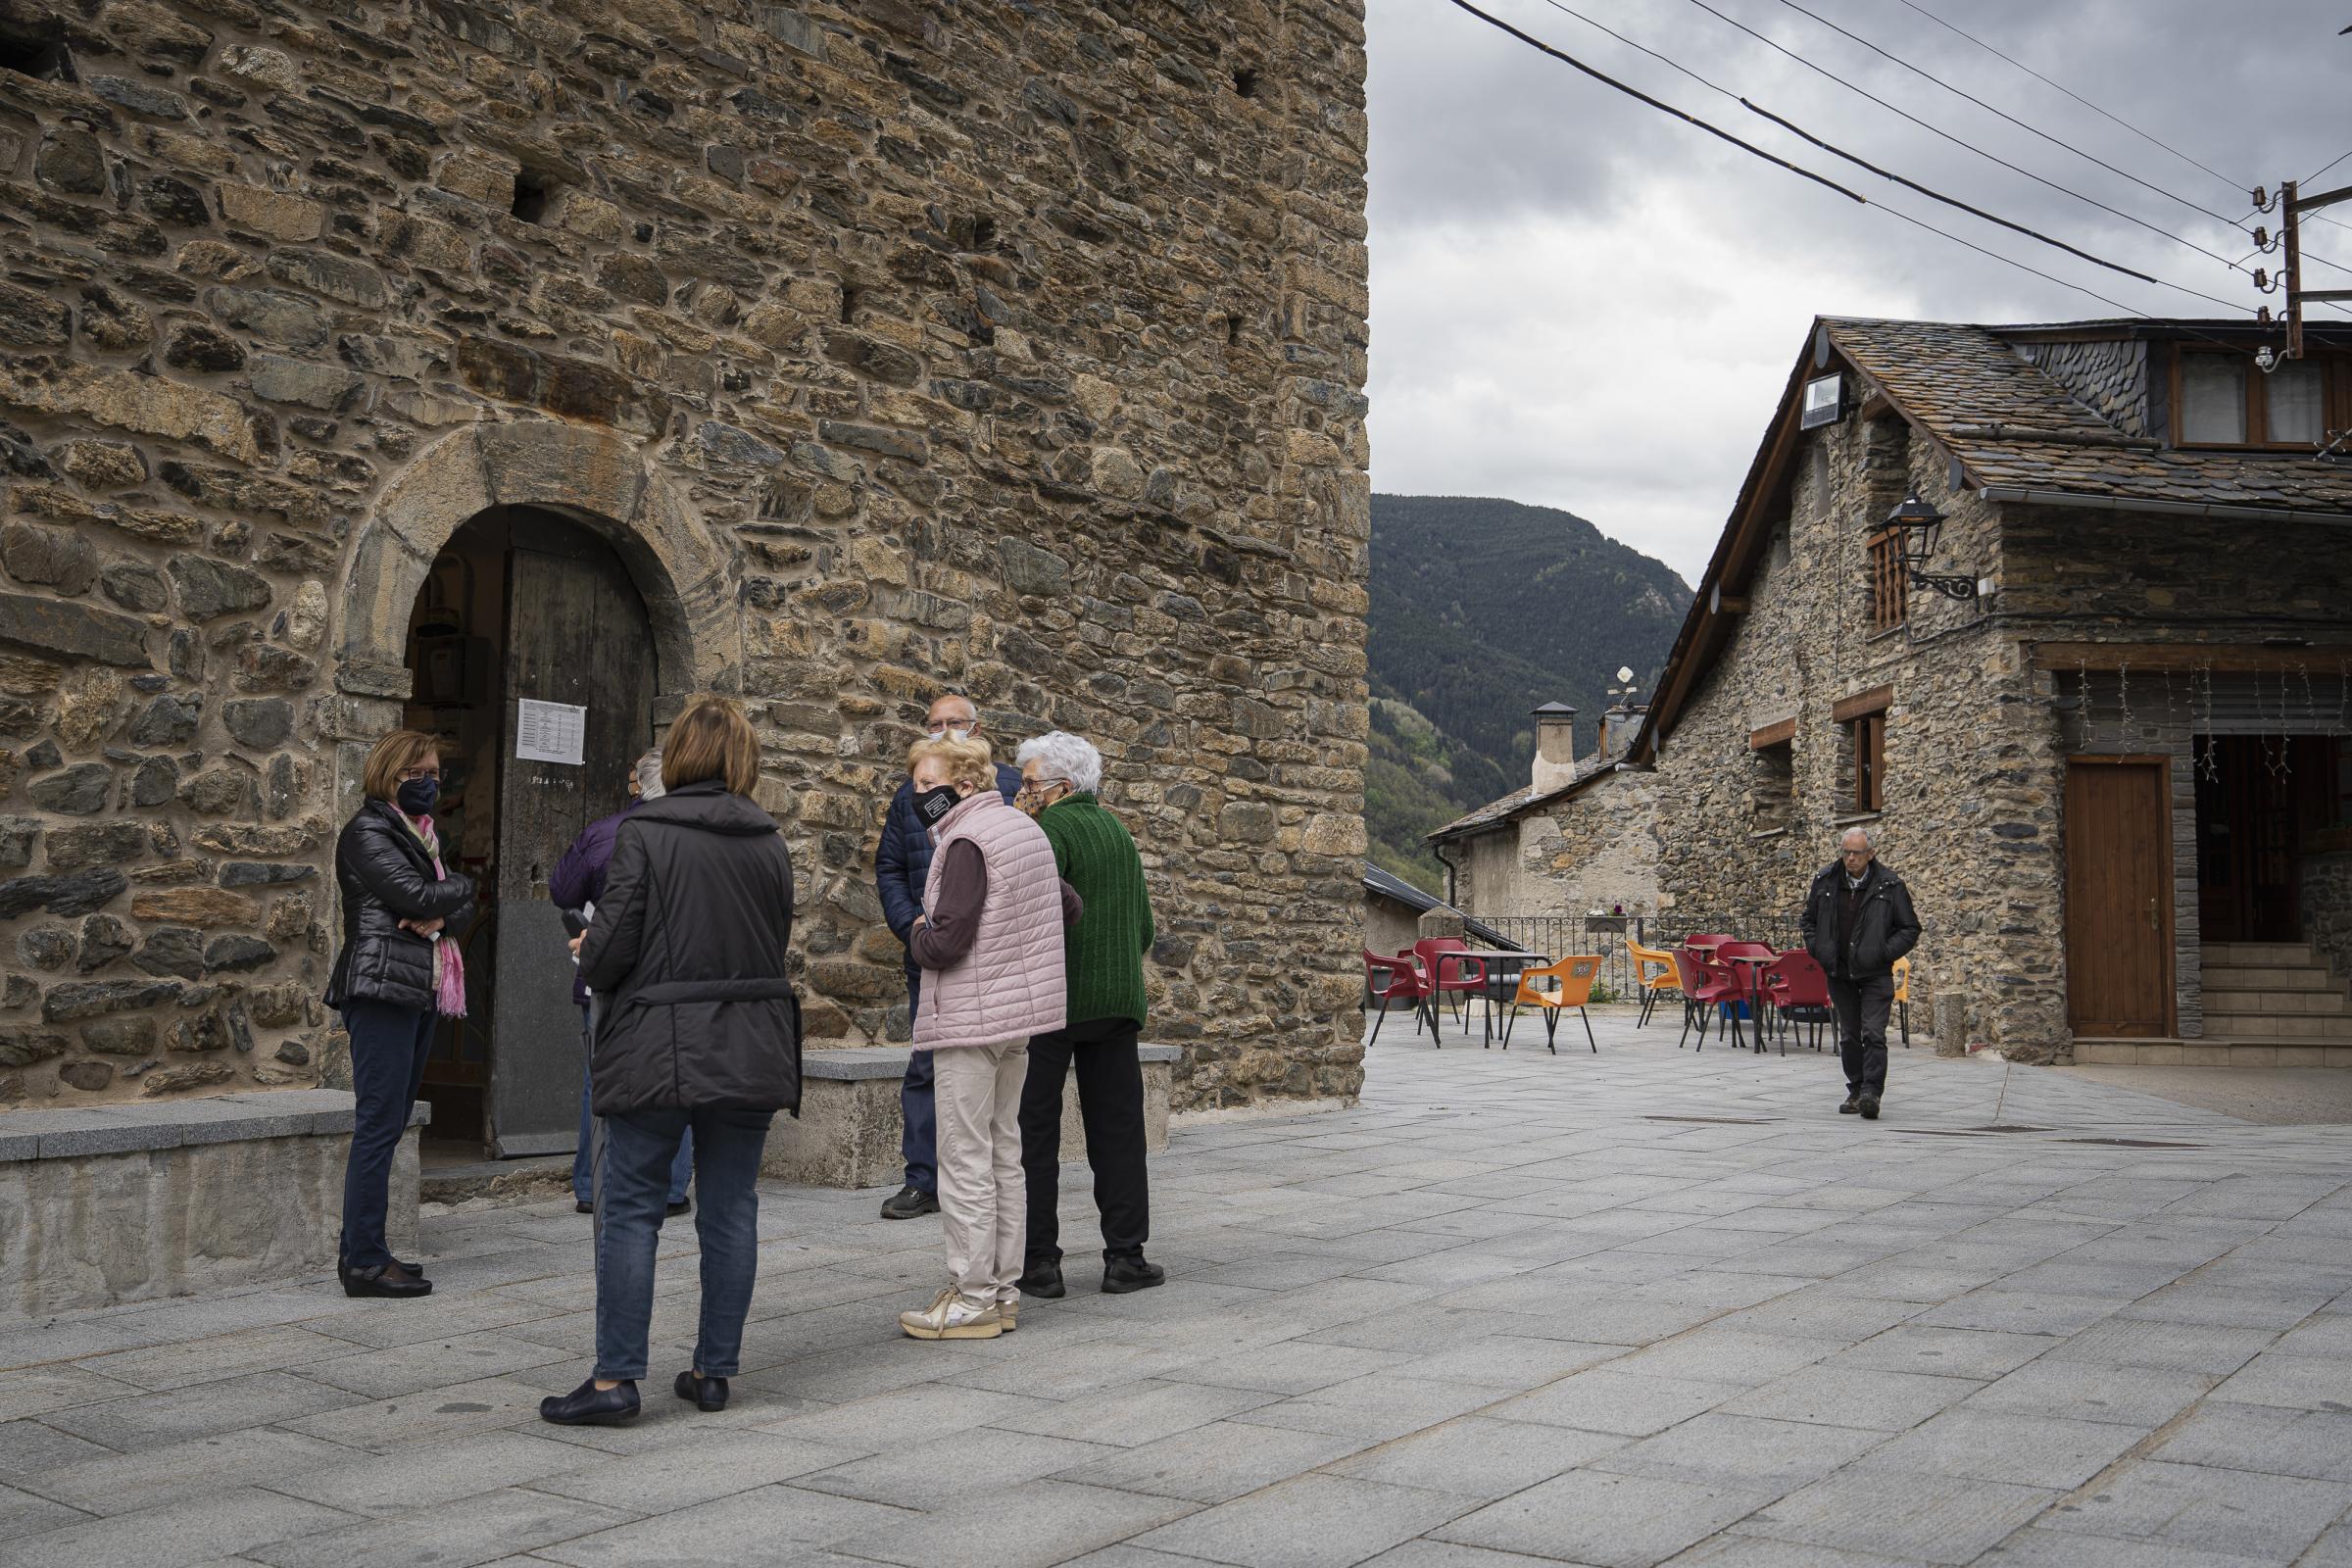  A group of villagers chat outside the Romanesque parish church of Sant Juli&agrave;...